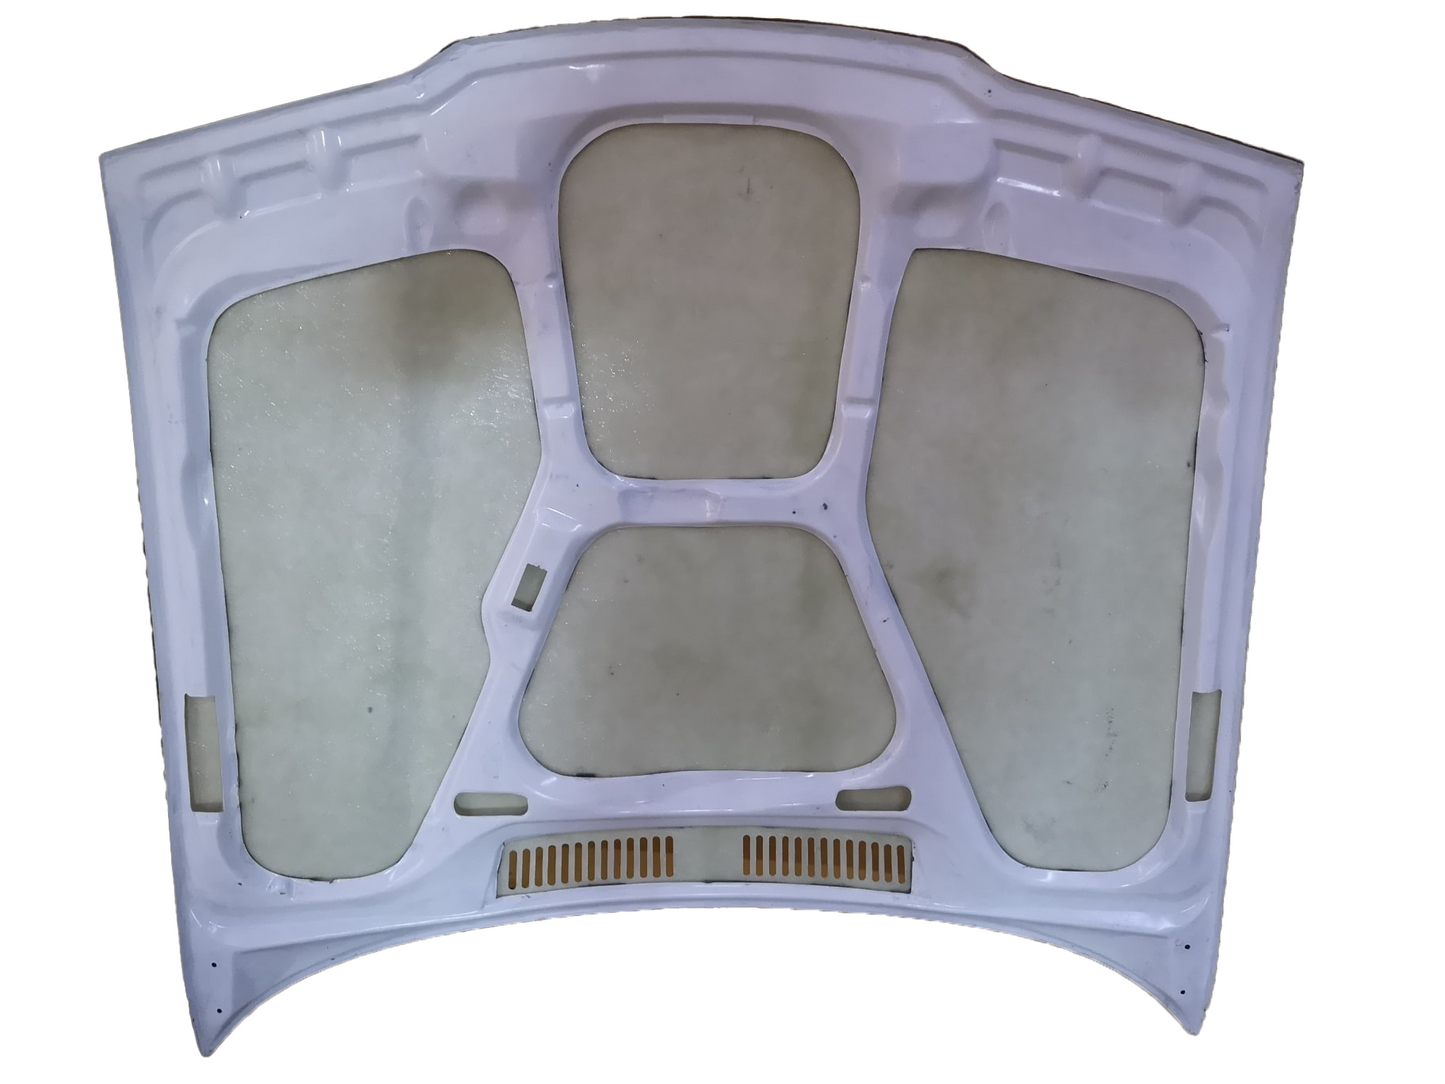 BMW E36 OEM Bonnet and Boot